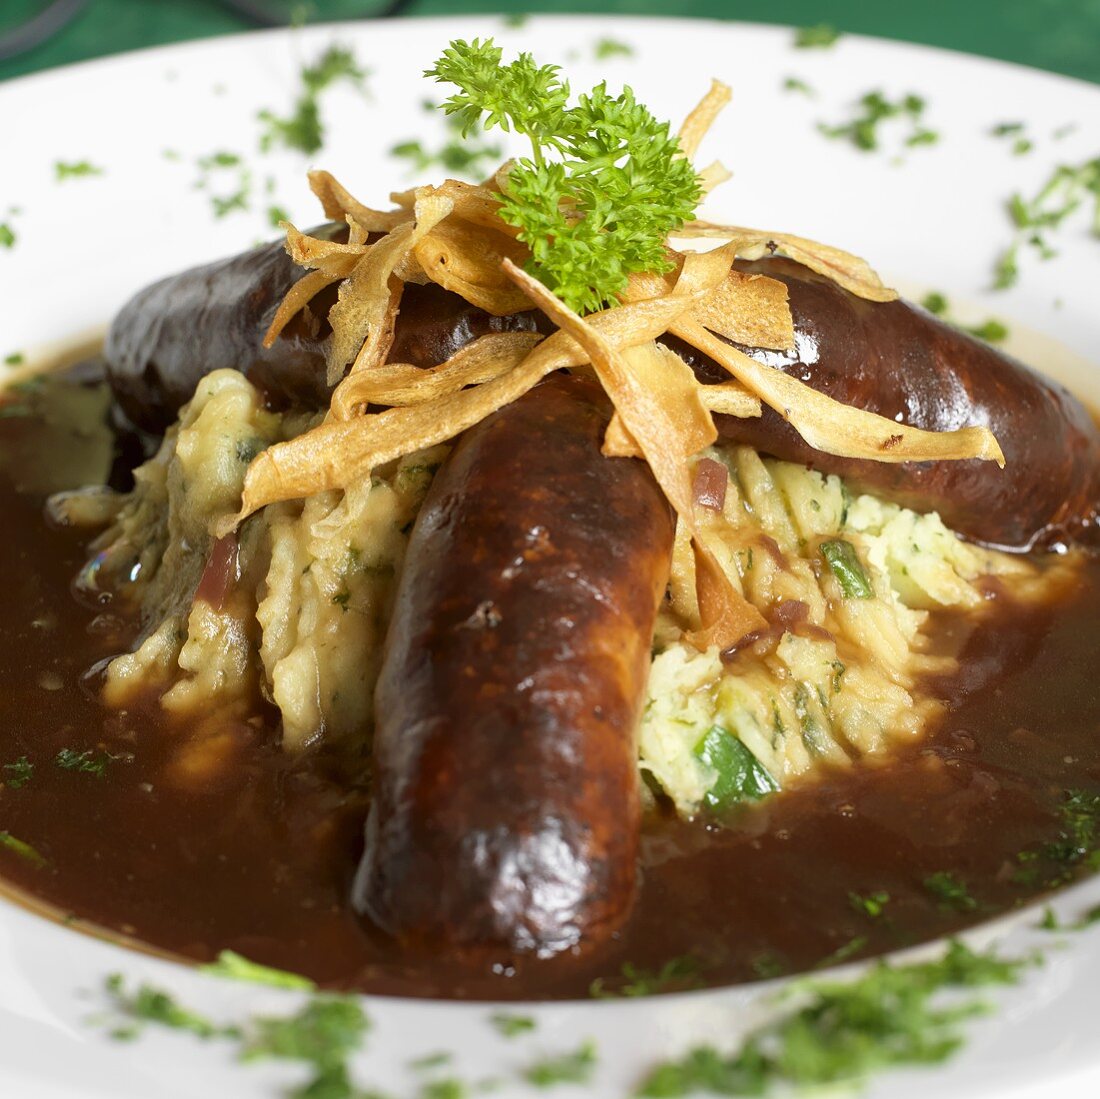 Sausage and mash with gravy